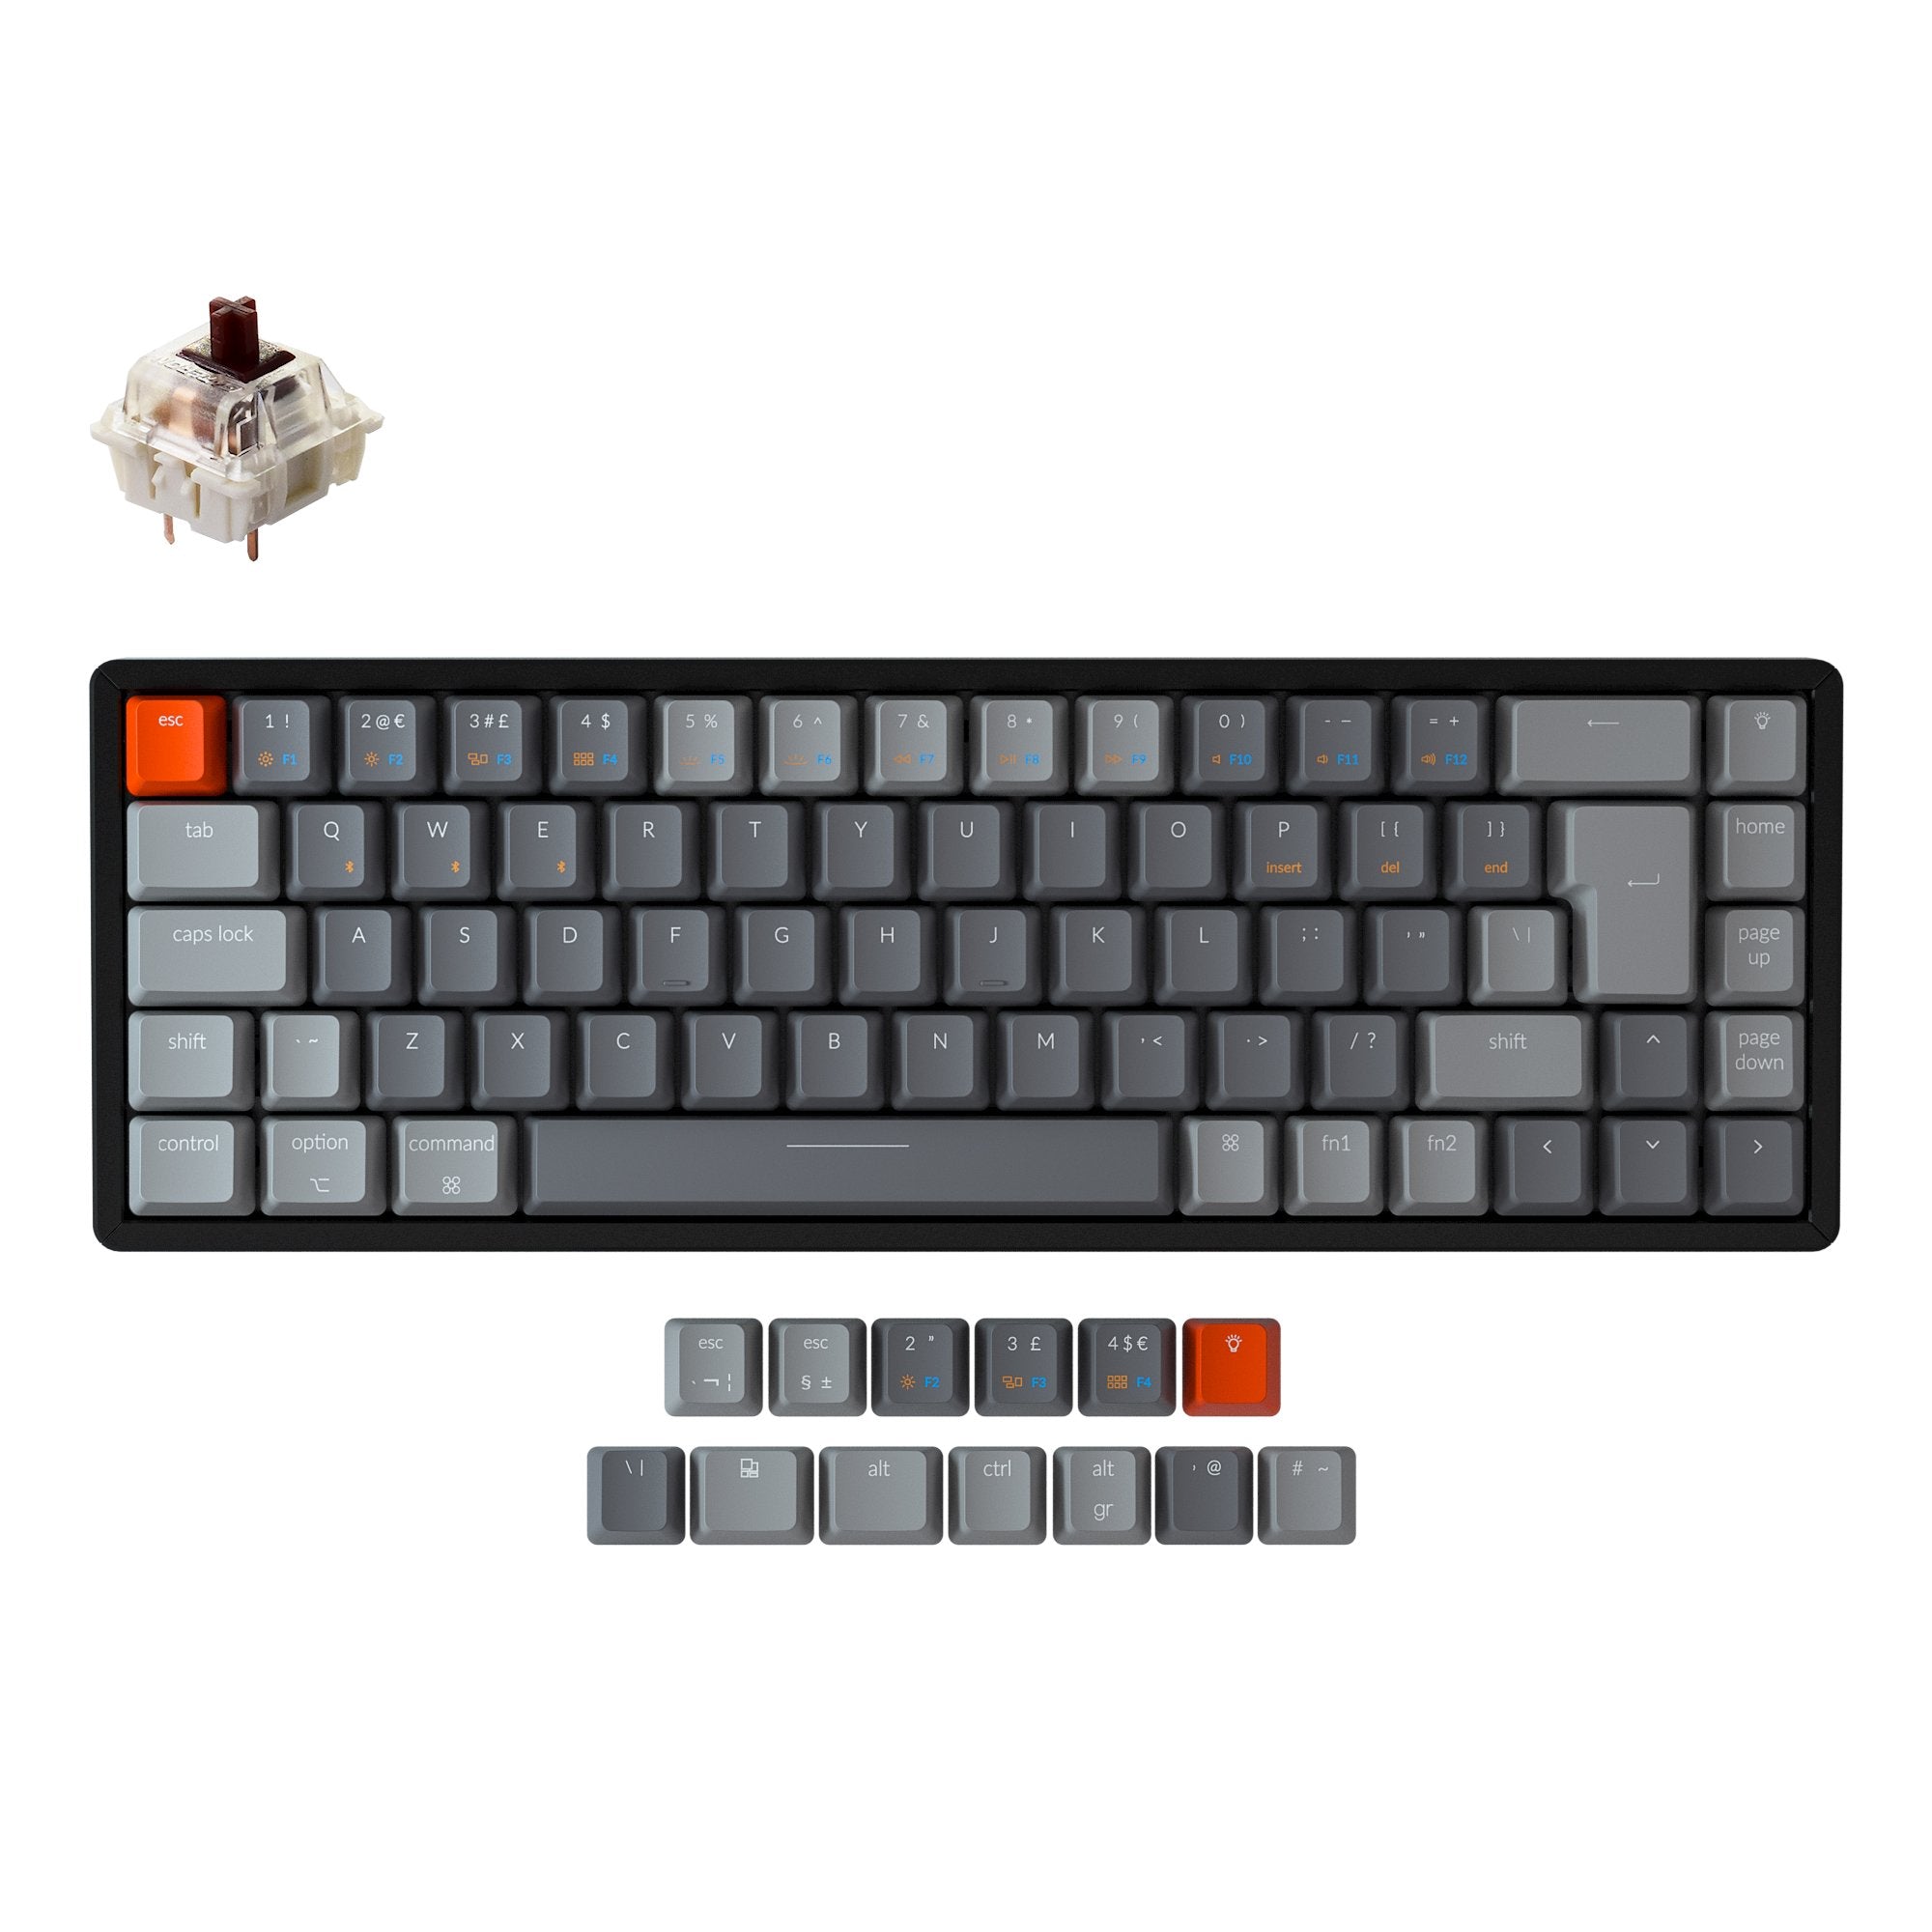 Keychron K6 65 percent compact wireless mechanical keyboard for Mac Windows iPad tablet UK ISO layout Gateron mechanical brown switch with RGB backlight with aluminum frame and hot-swappable